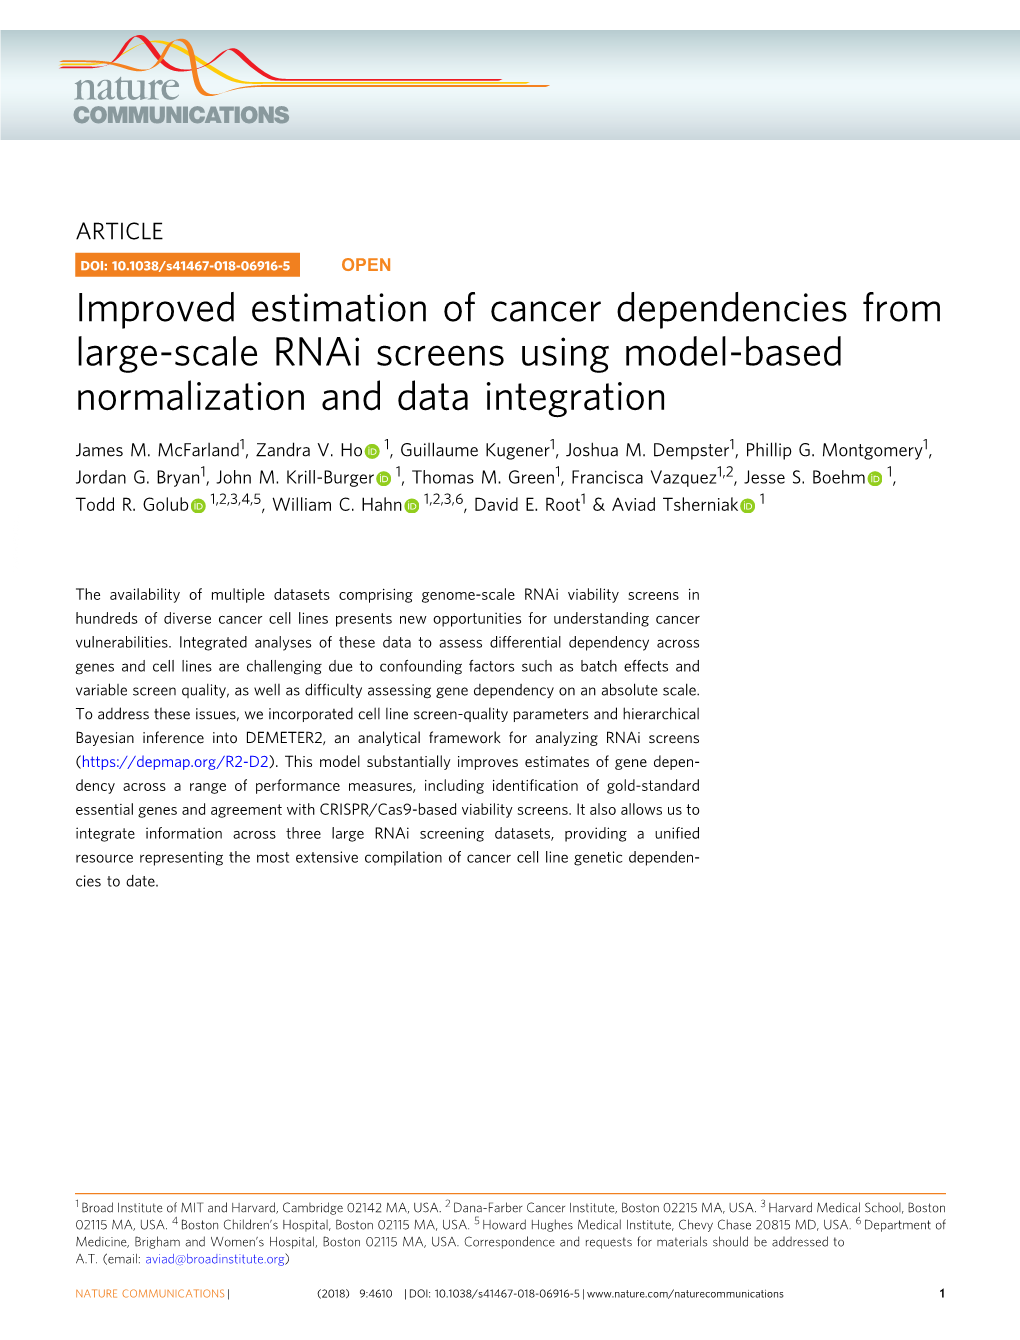 Improved Estimation of Cancer Dependencies from Large-Scale Rnai Screens Using Model-Based Normalization and Data Integration